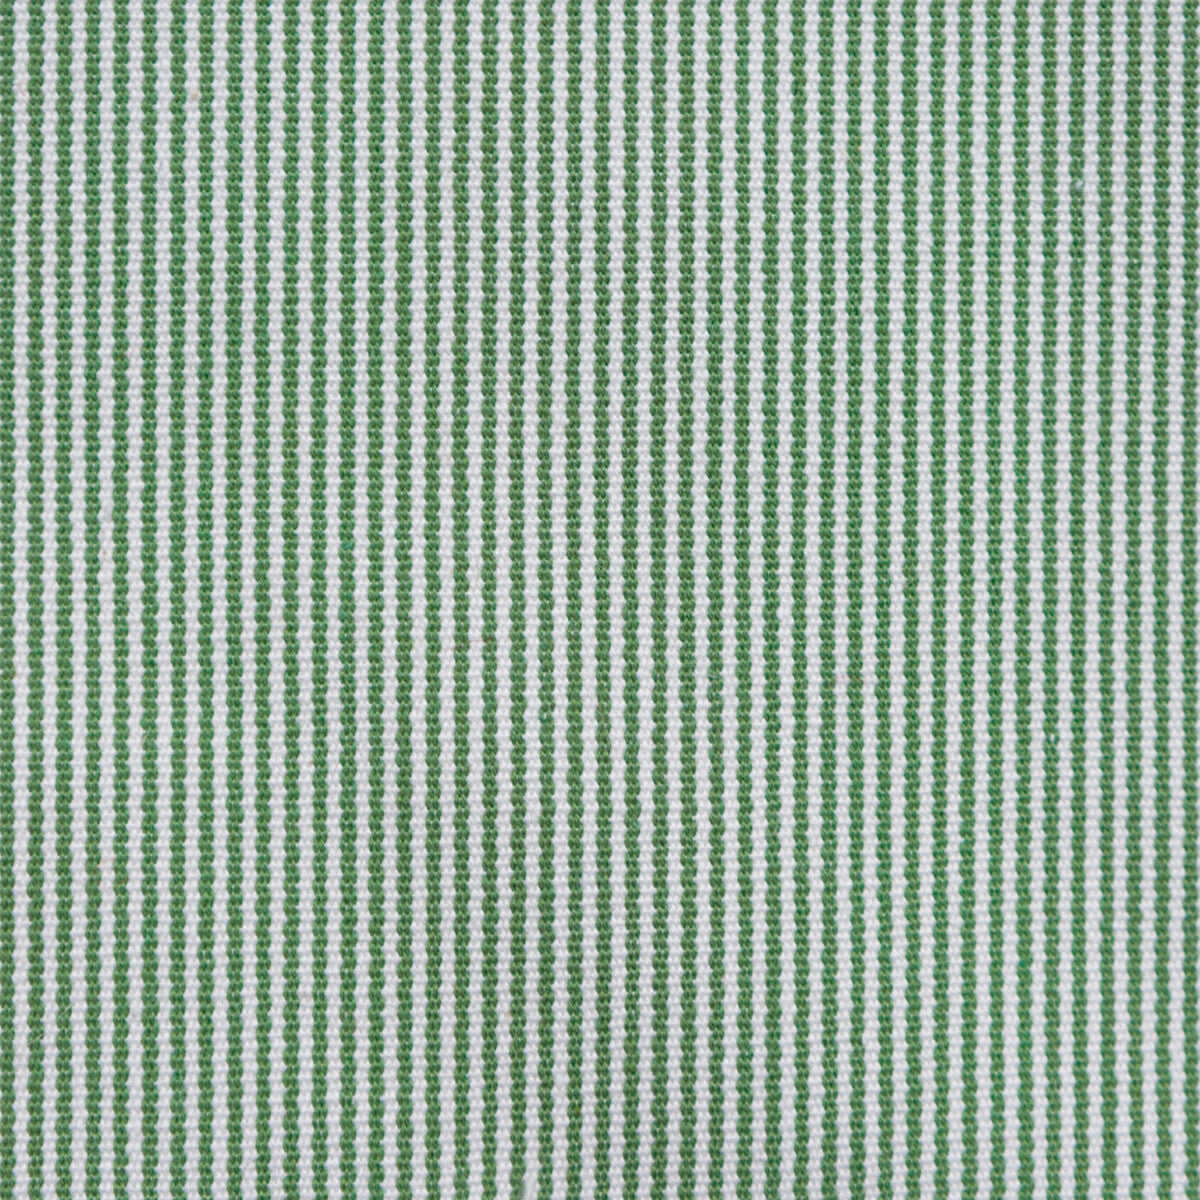 Talaiot fabric in verde/blanco color - pattern GDT5672.002.0 - by Gaston y Daniela in the Gaston Maiorica collection